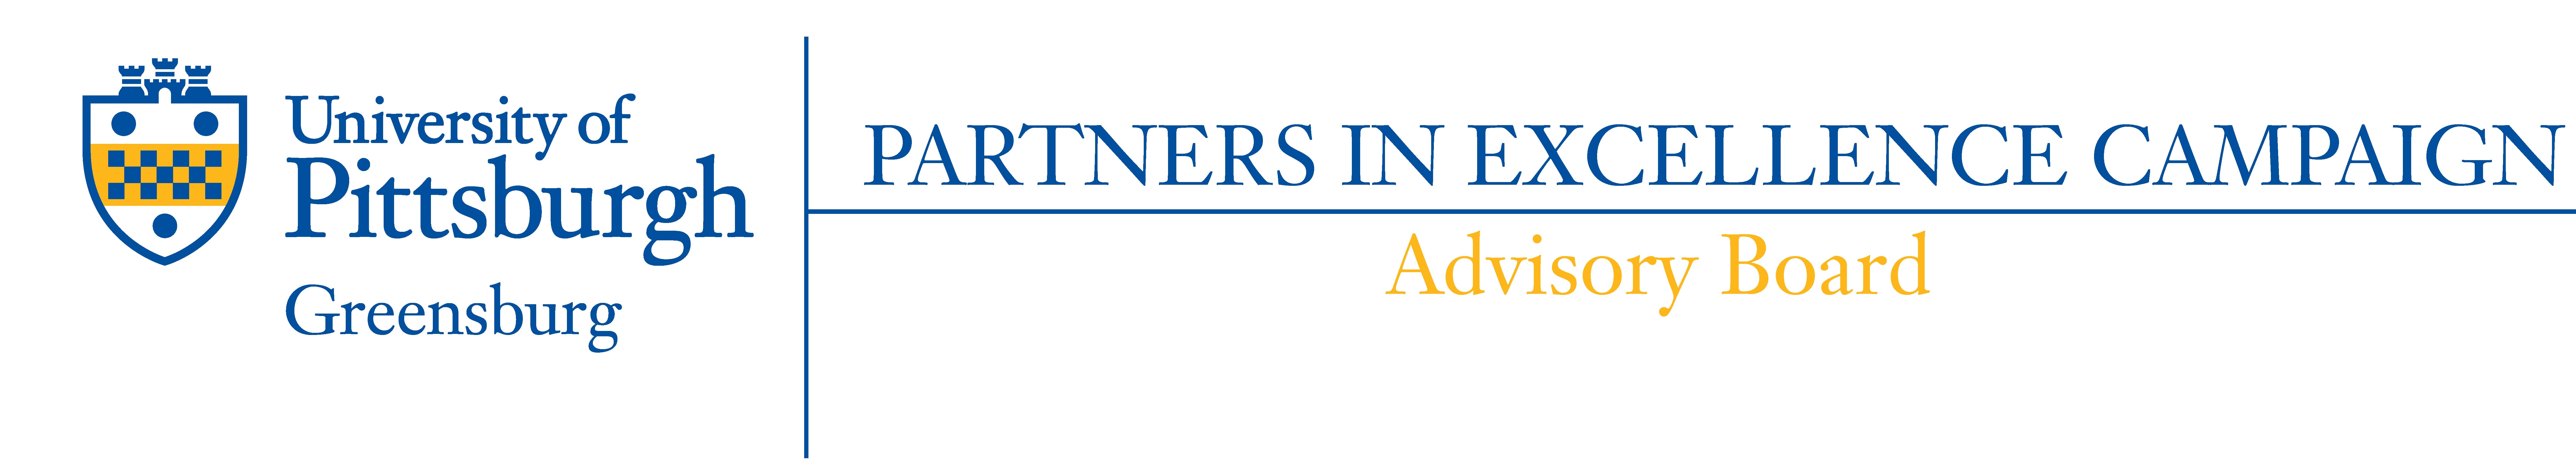 Partners in Excellence campaign logo